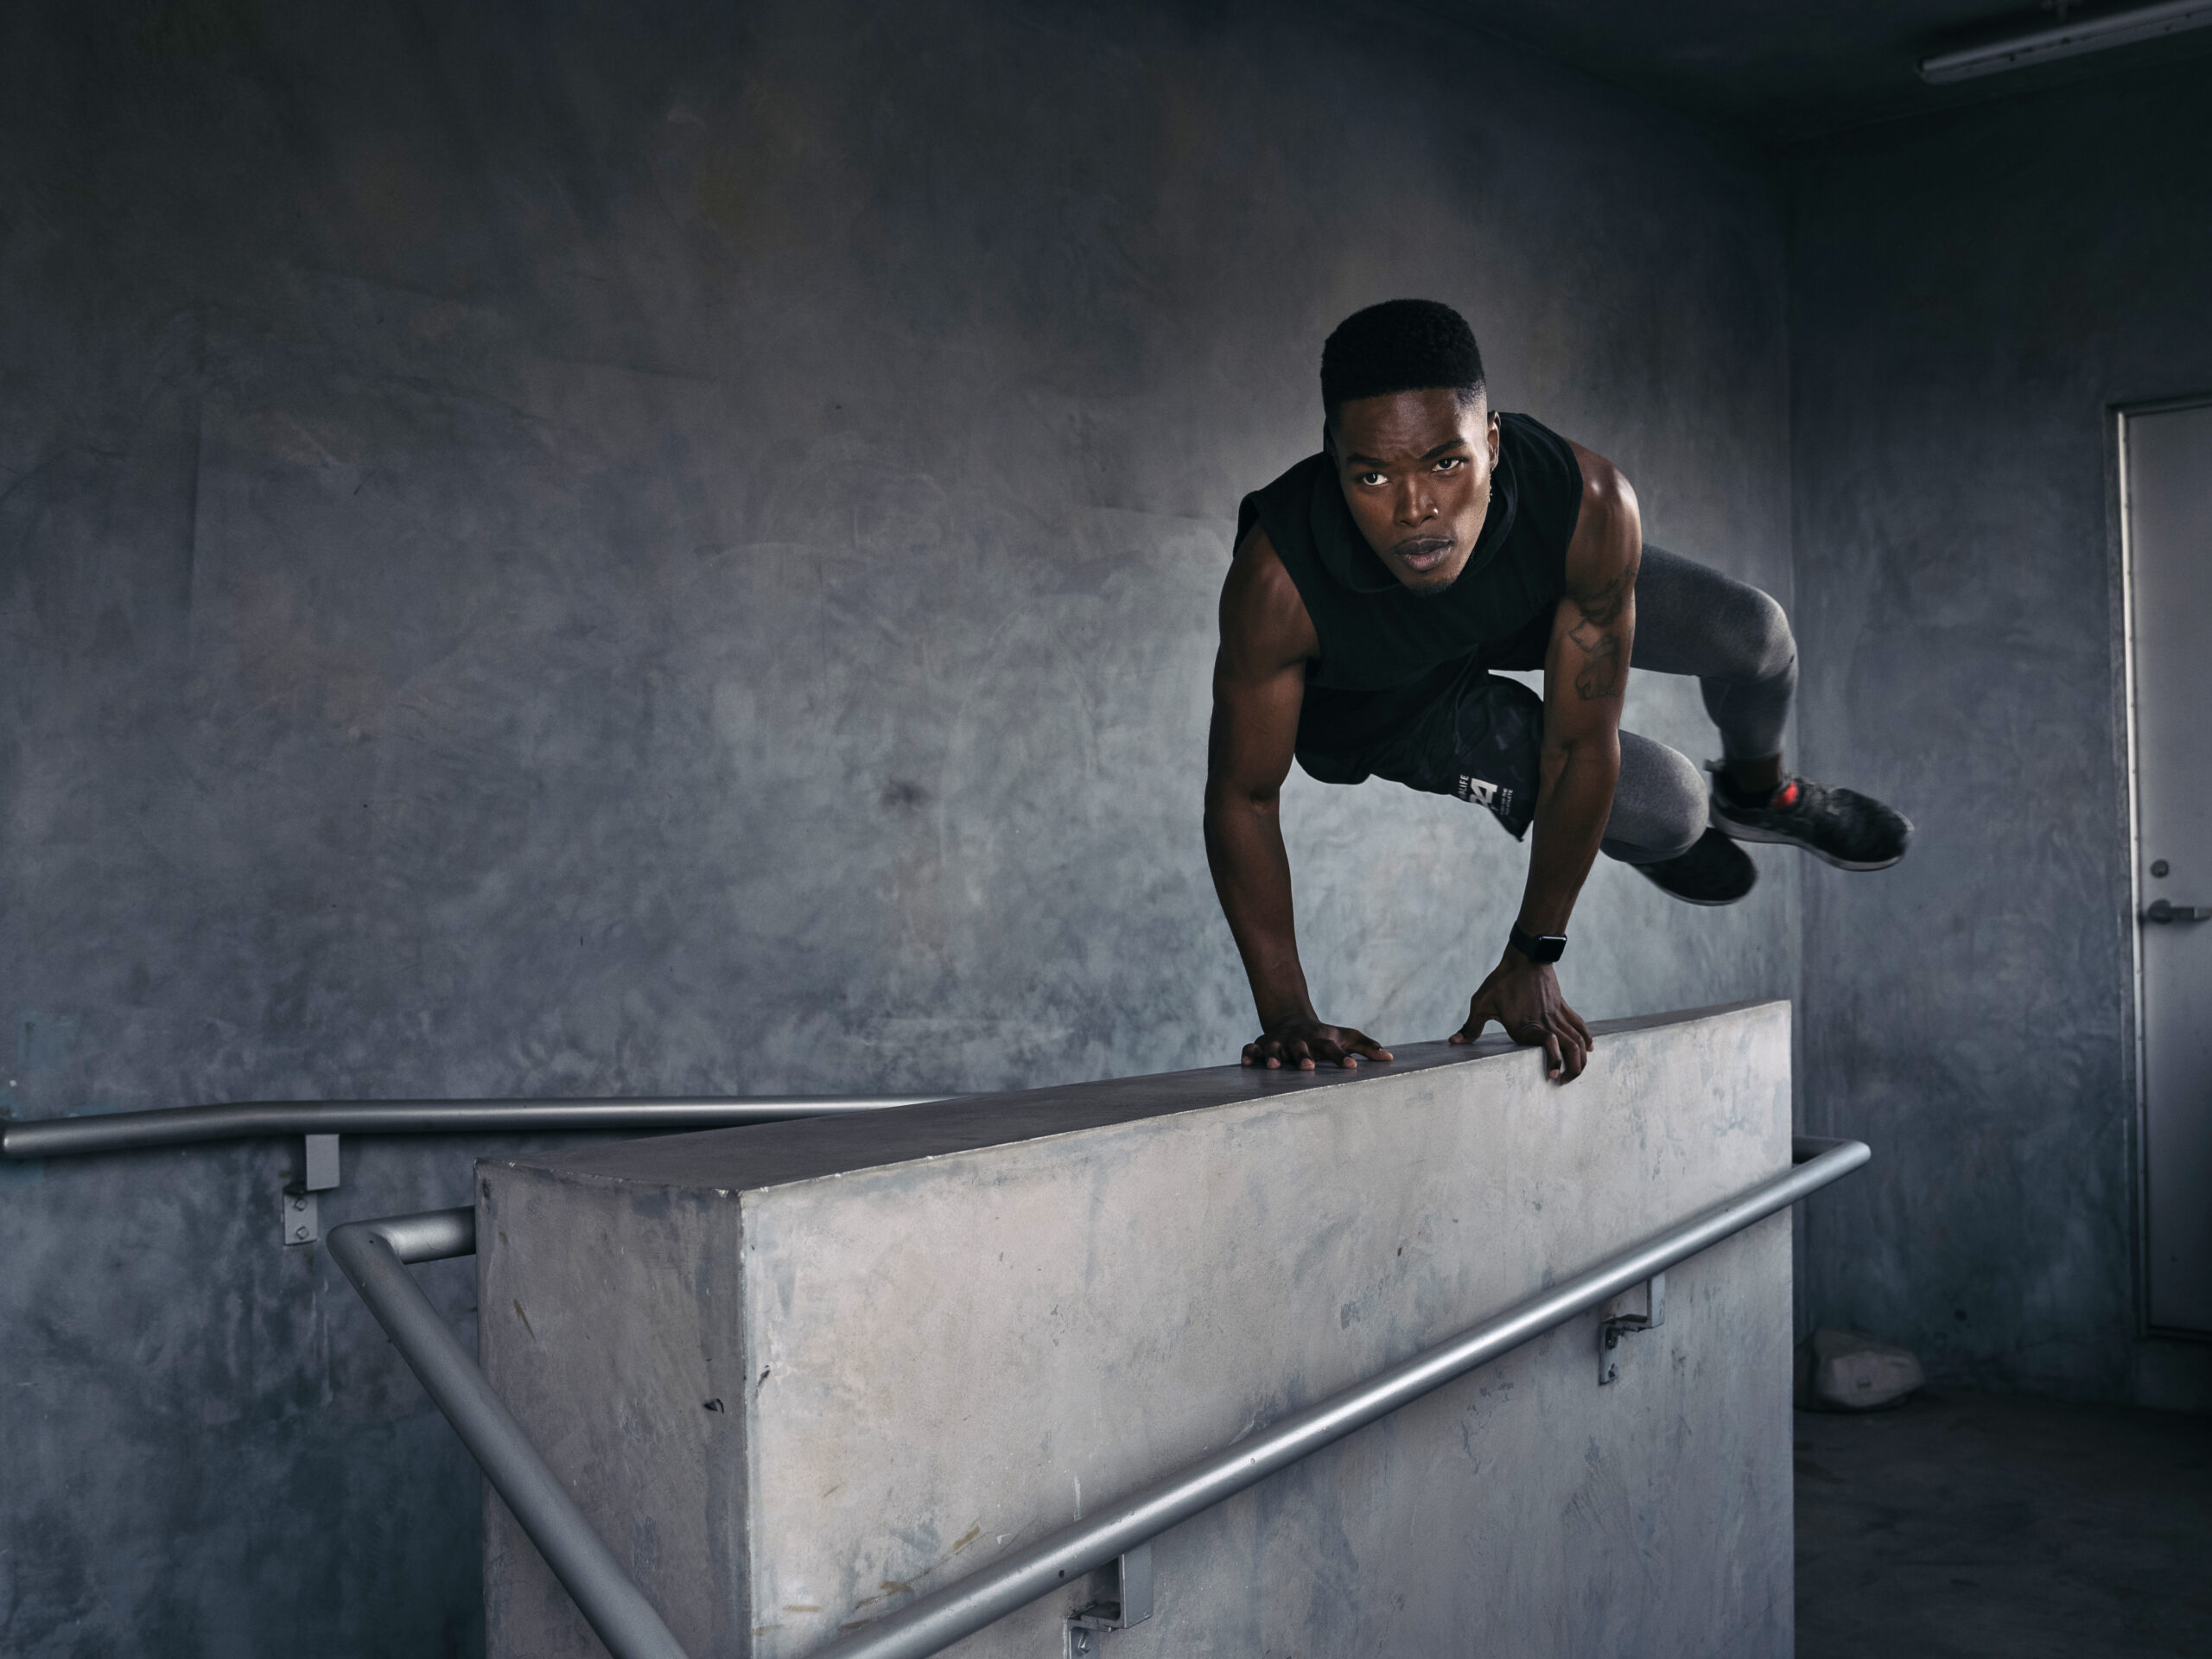 A man performs a parkour move, launching himself over a wall in a stairwell in this photo by Michael Dorman